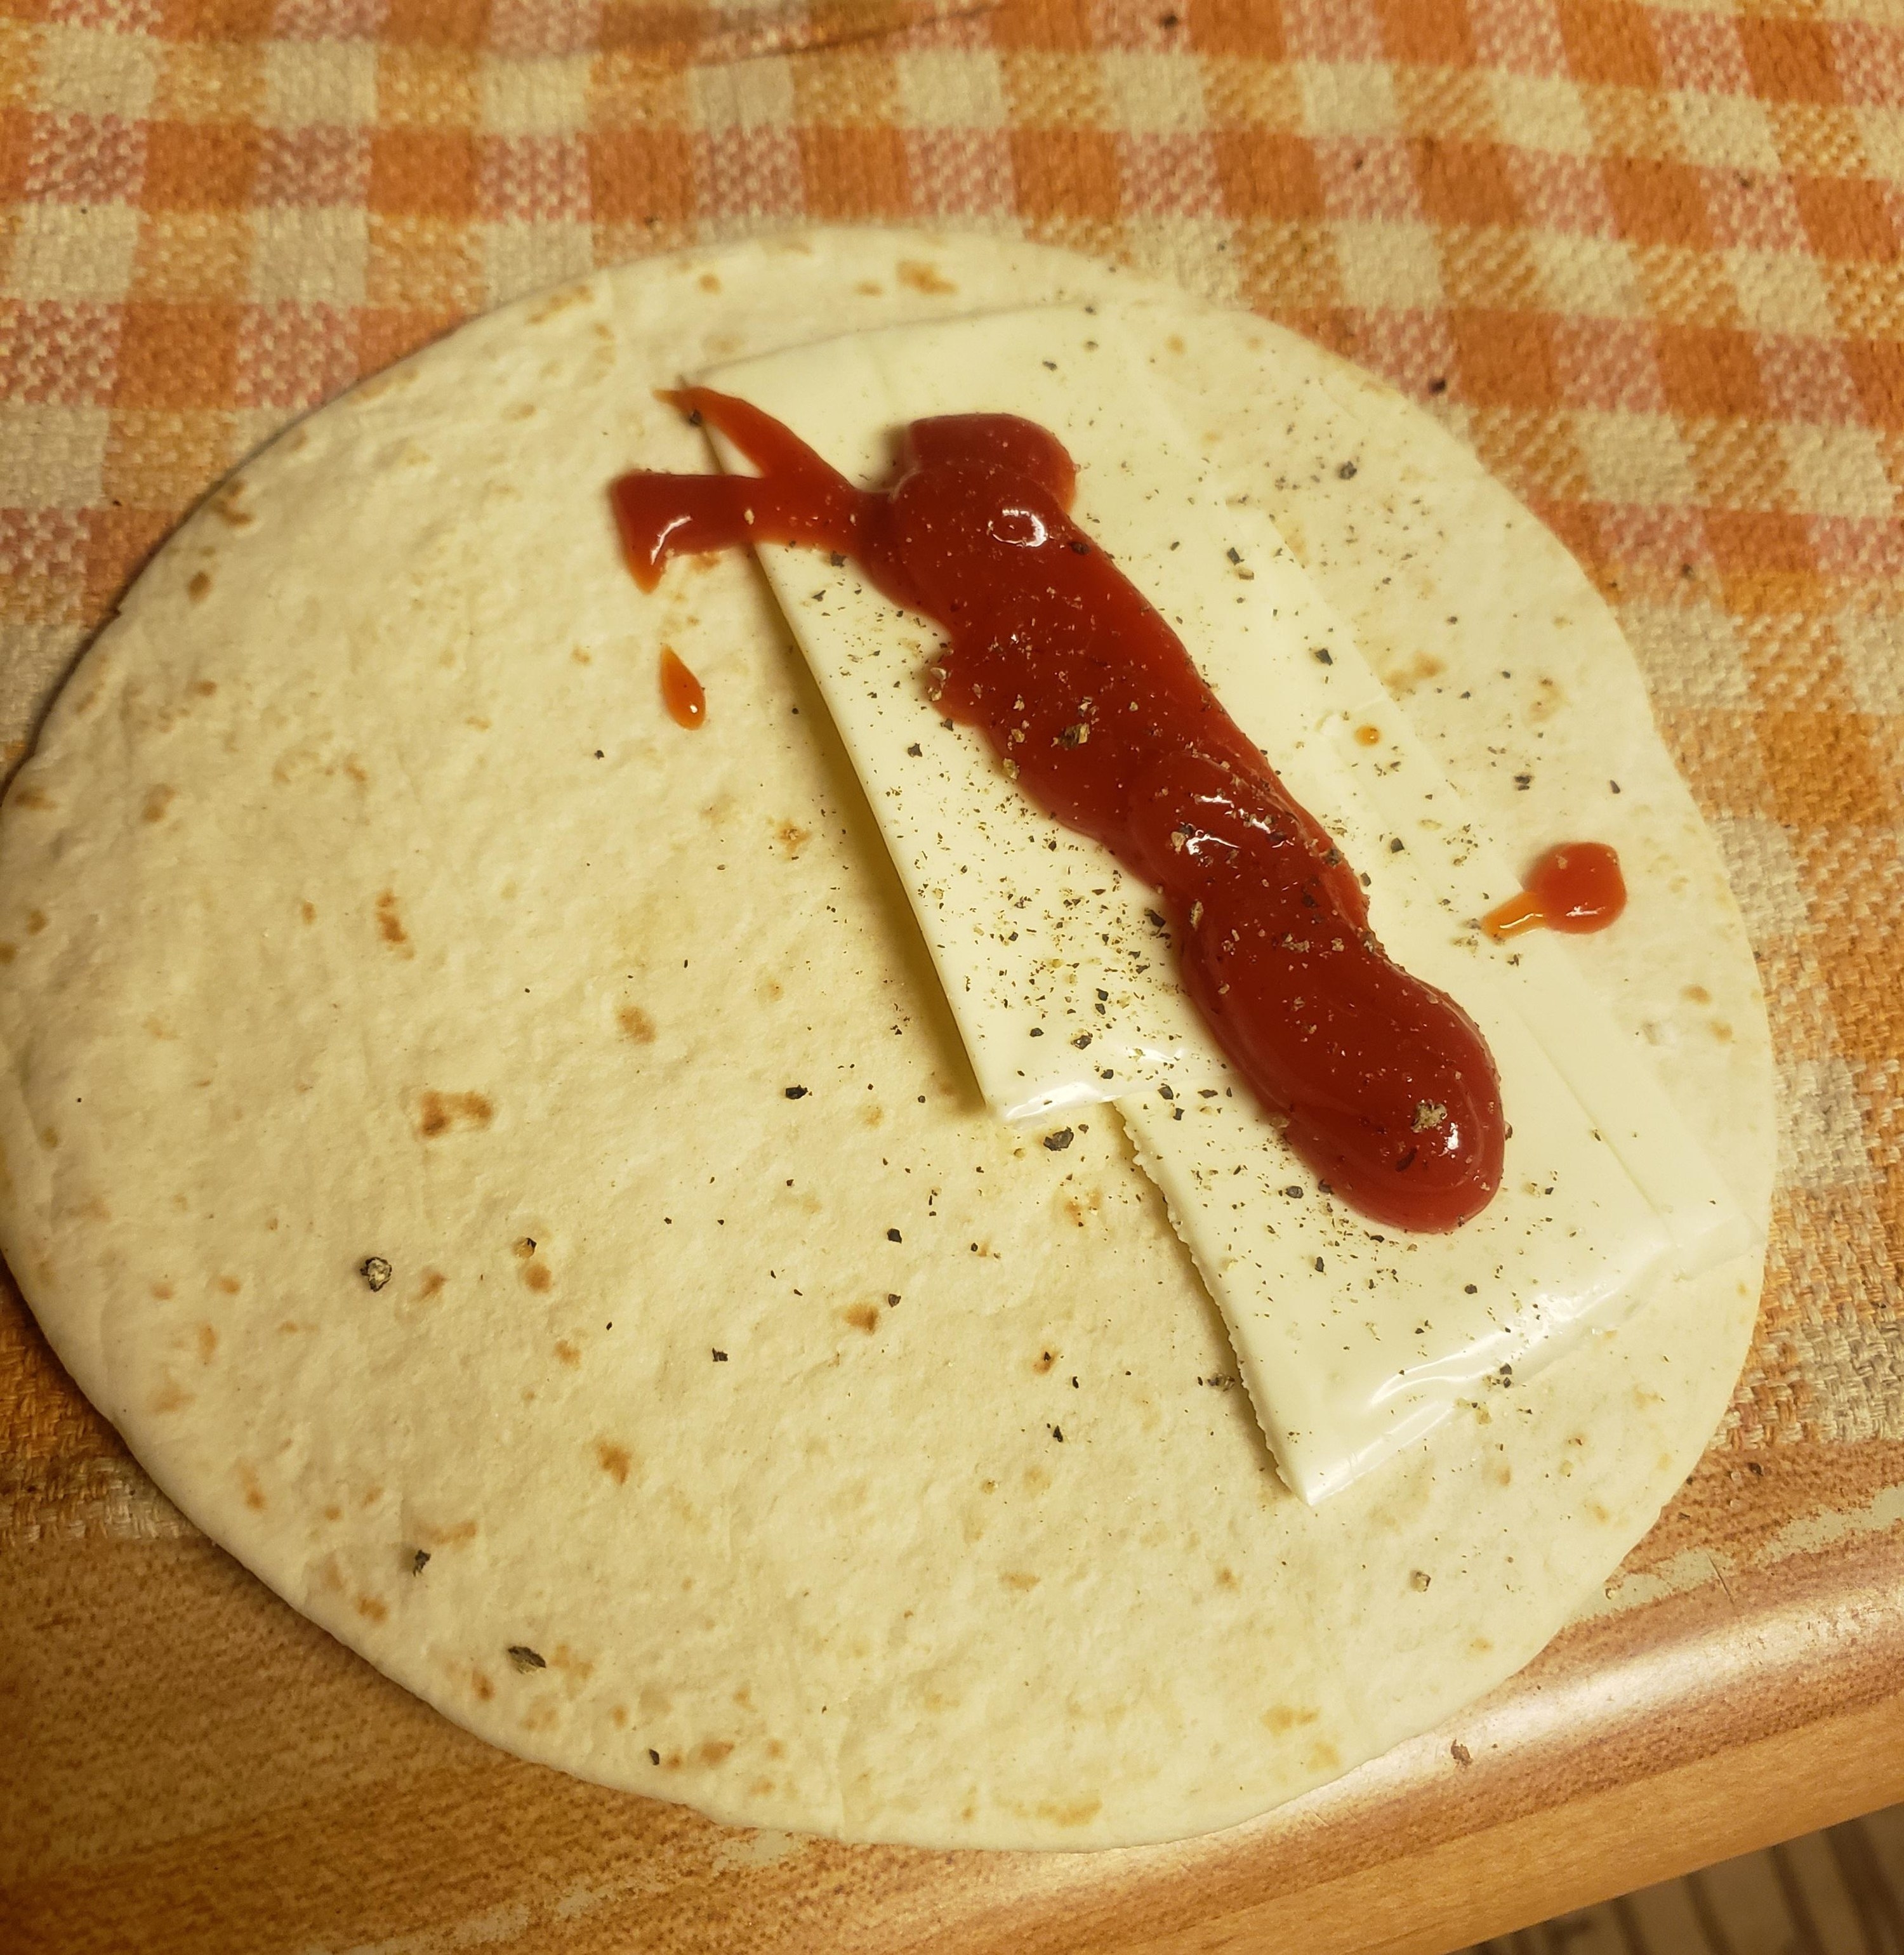 A tortilla with sliced white cheddar, a splat of ketchup, and pepper